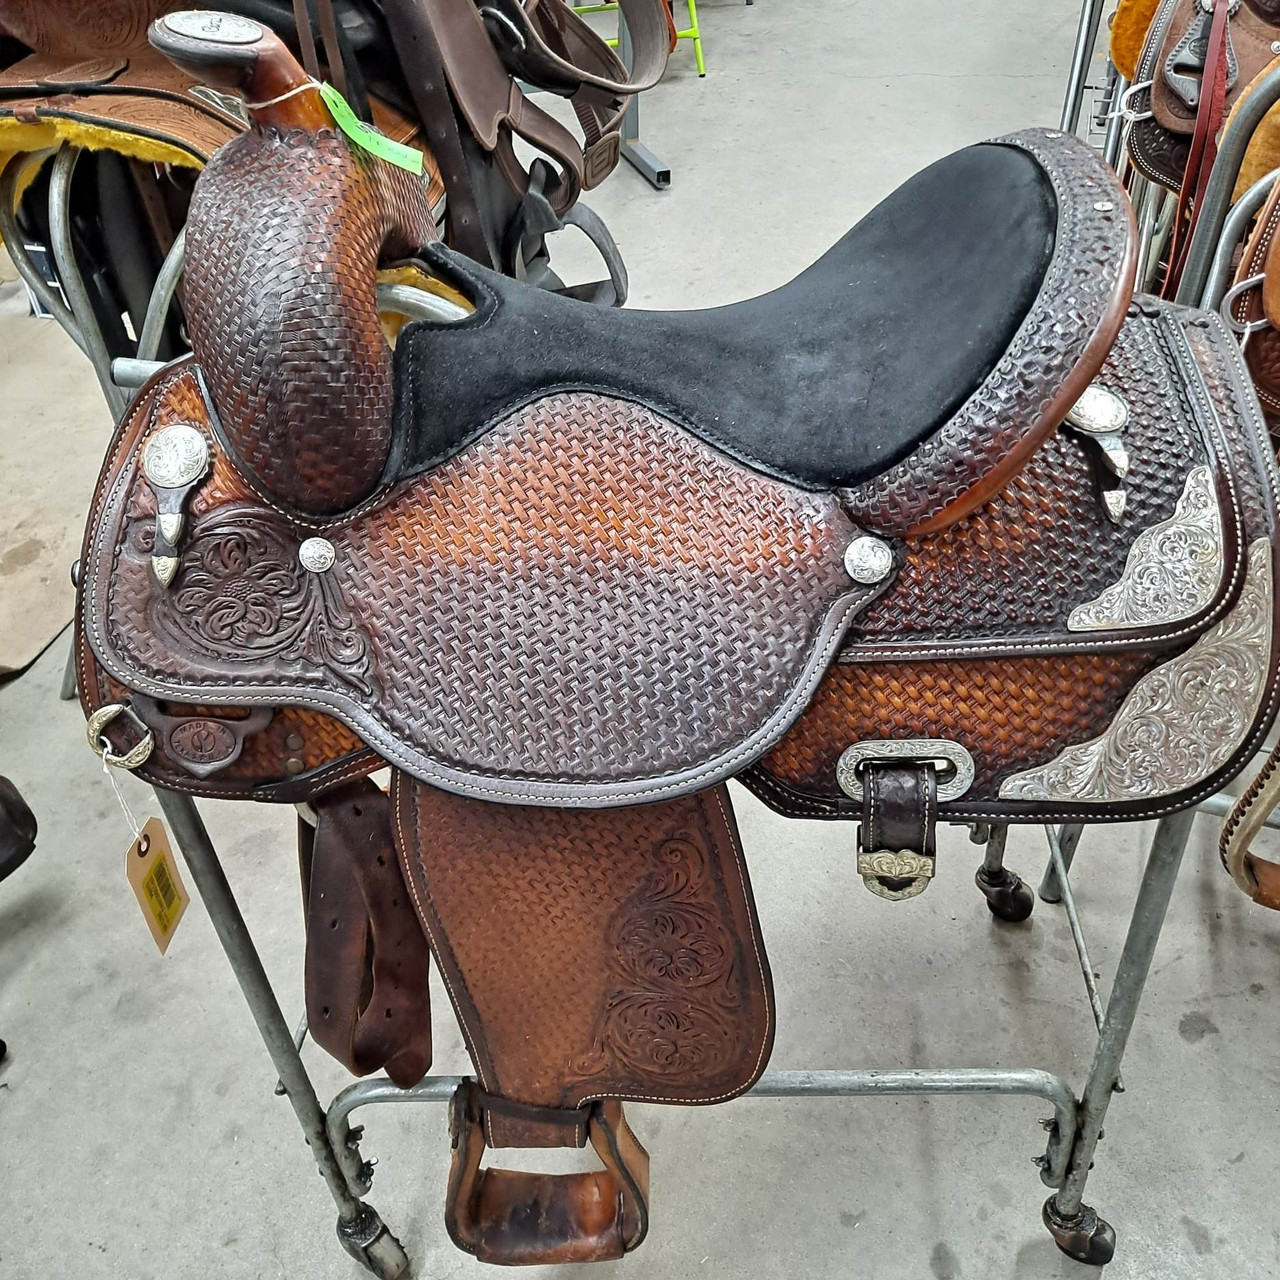 Used Trail or Pleasure Saddle by Circle Y with 15 inch seat. S1694